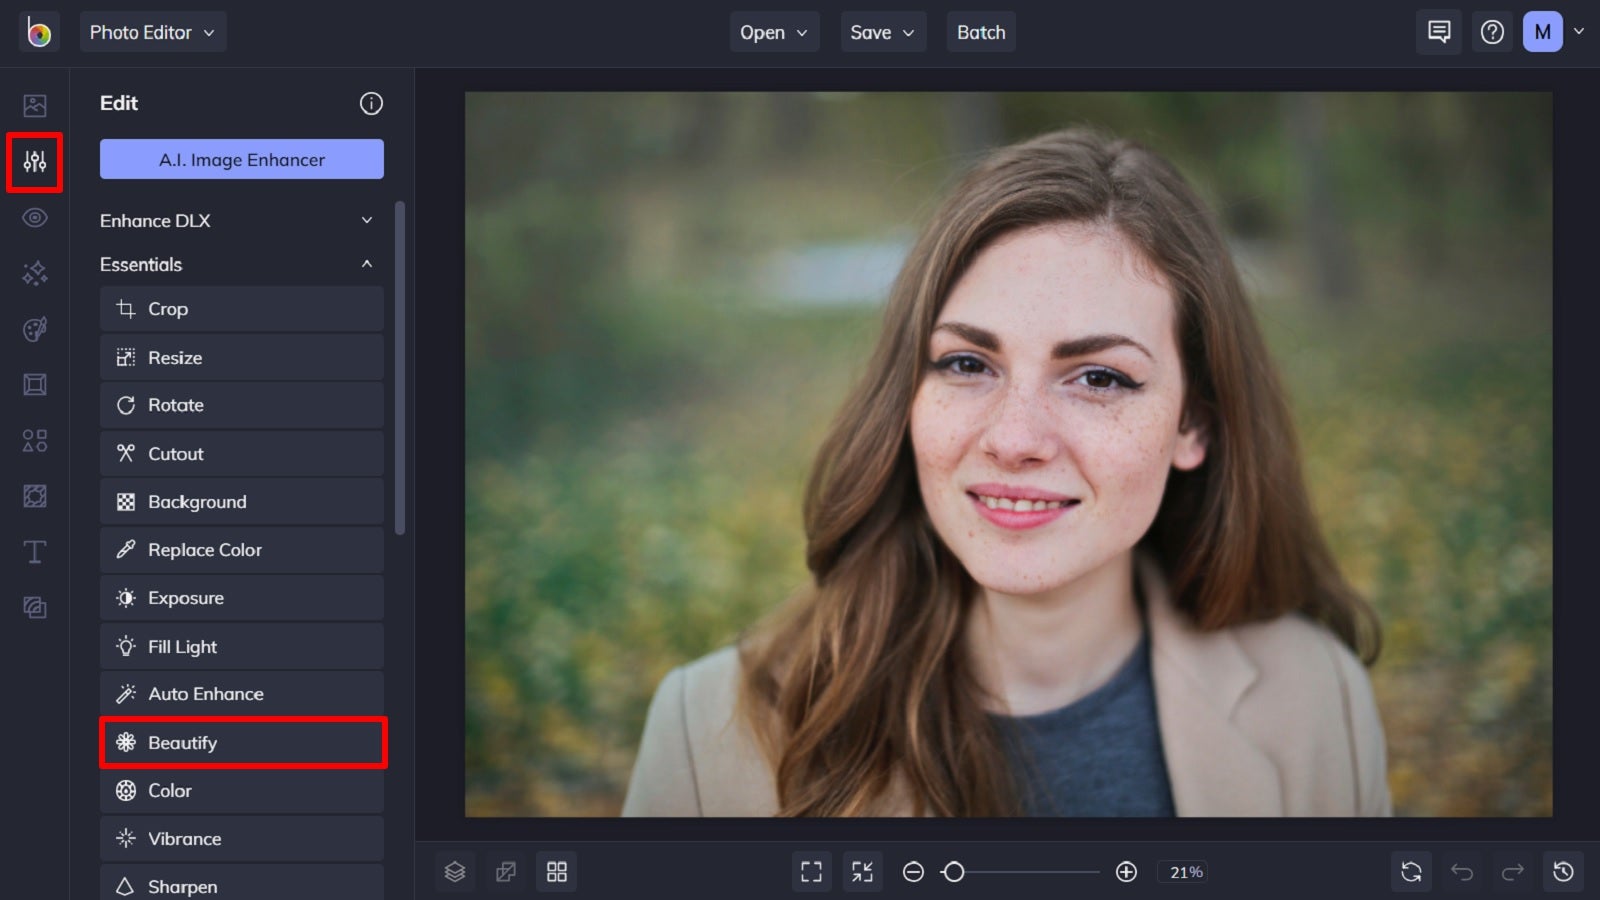 How to Use Photo Editing Software to Enhance Your Images